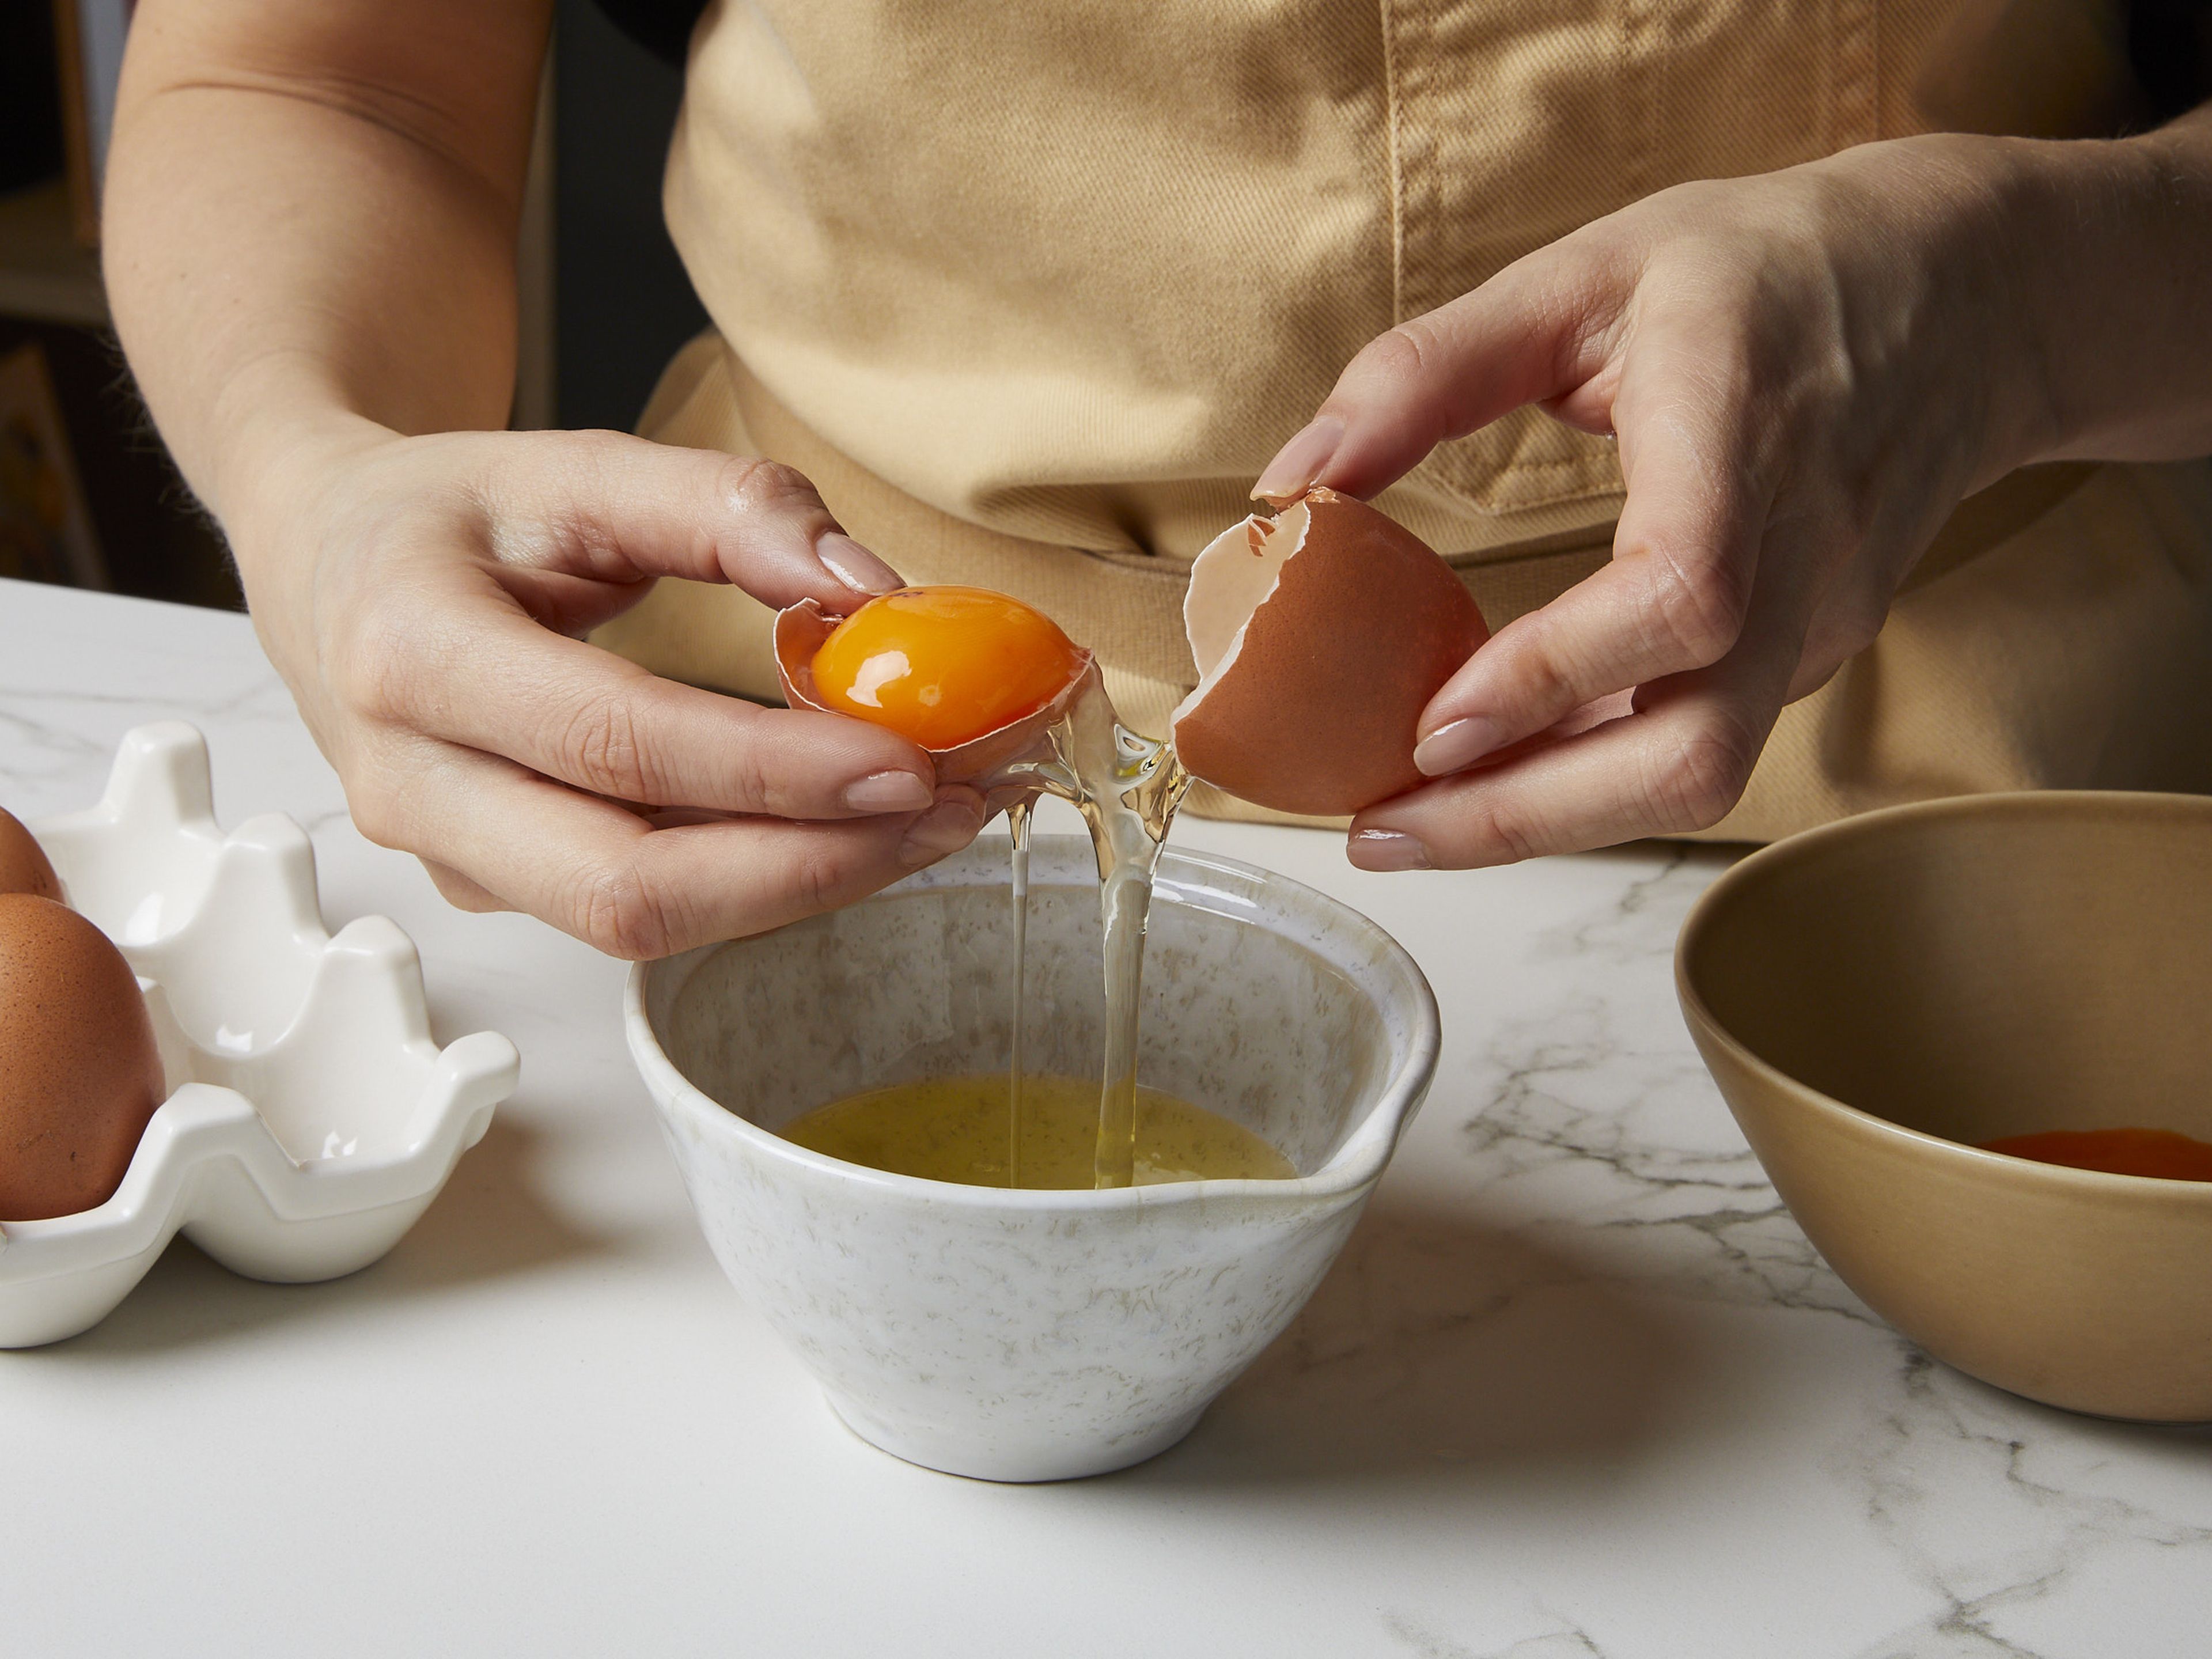 Separate the eggs, keeping the yolks in a small bowl and saving the whites for another recipe. Melt the butter in a saucepan, being careful not to let it brown. Mix egg yolks, lemon juice, salt, and pepper in a measuring cup.